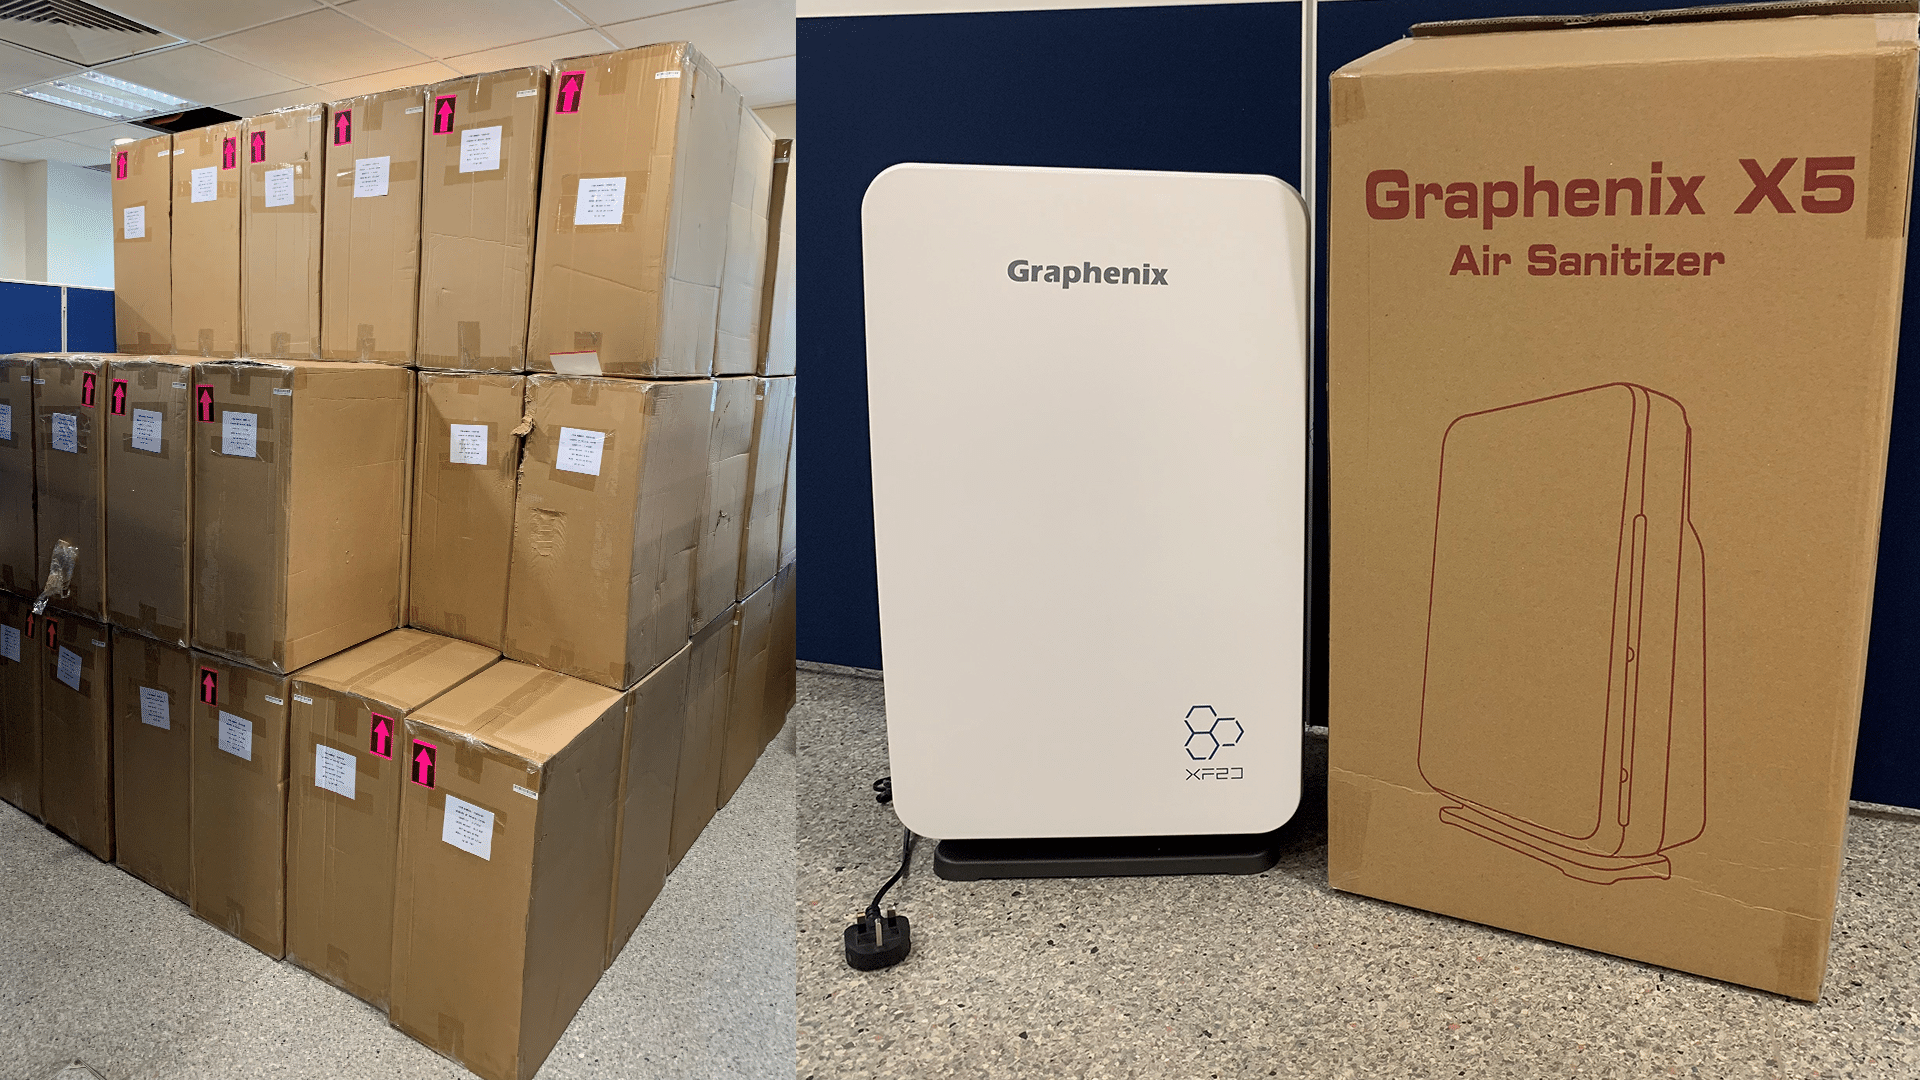 The Graphenix devices recently arrived in a shipment from China